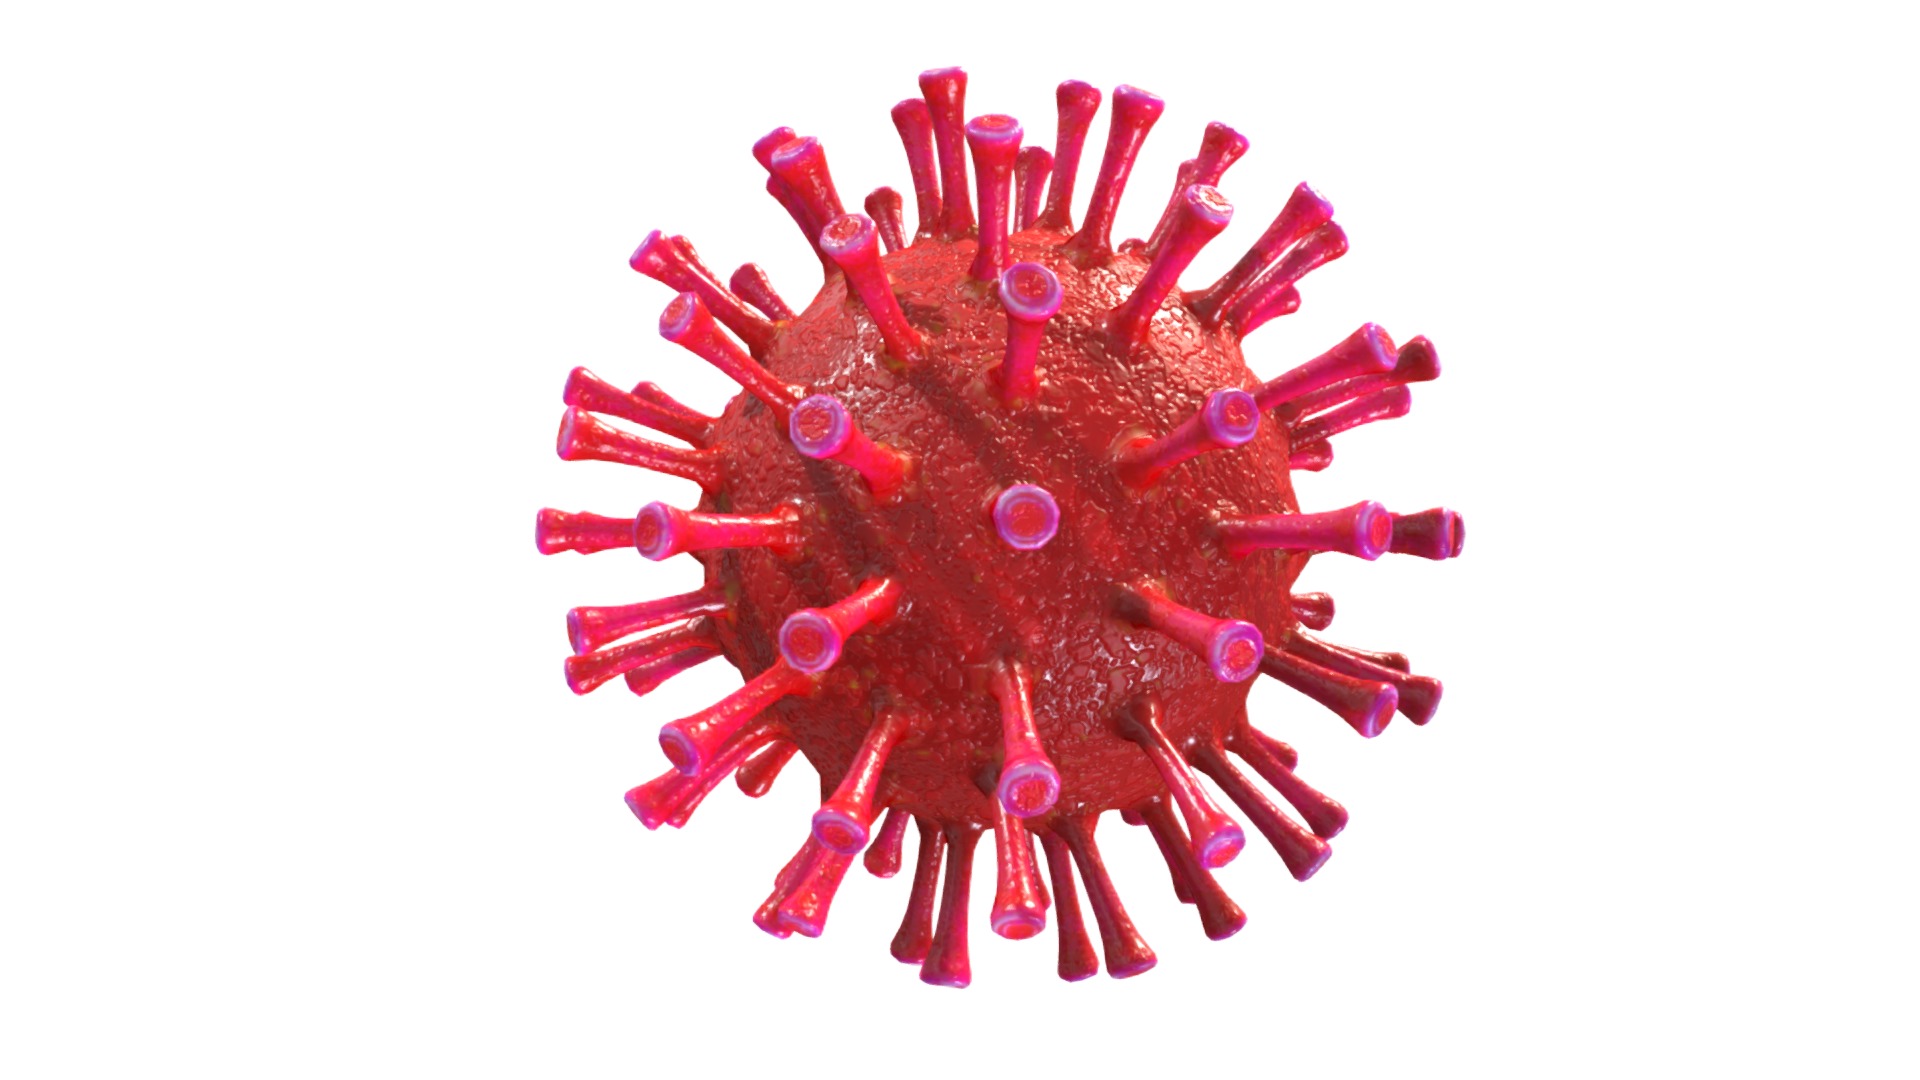 3D model Corona Virus Covid 19 - This is a 3D model of the Corona Virus Covid 19. The 3D model is about a red toy with many small red objects on it.